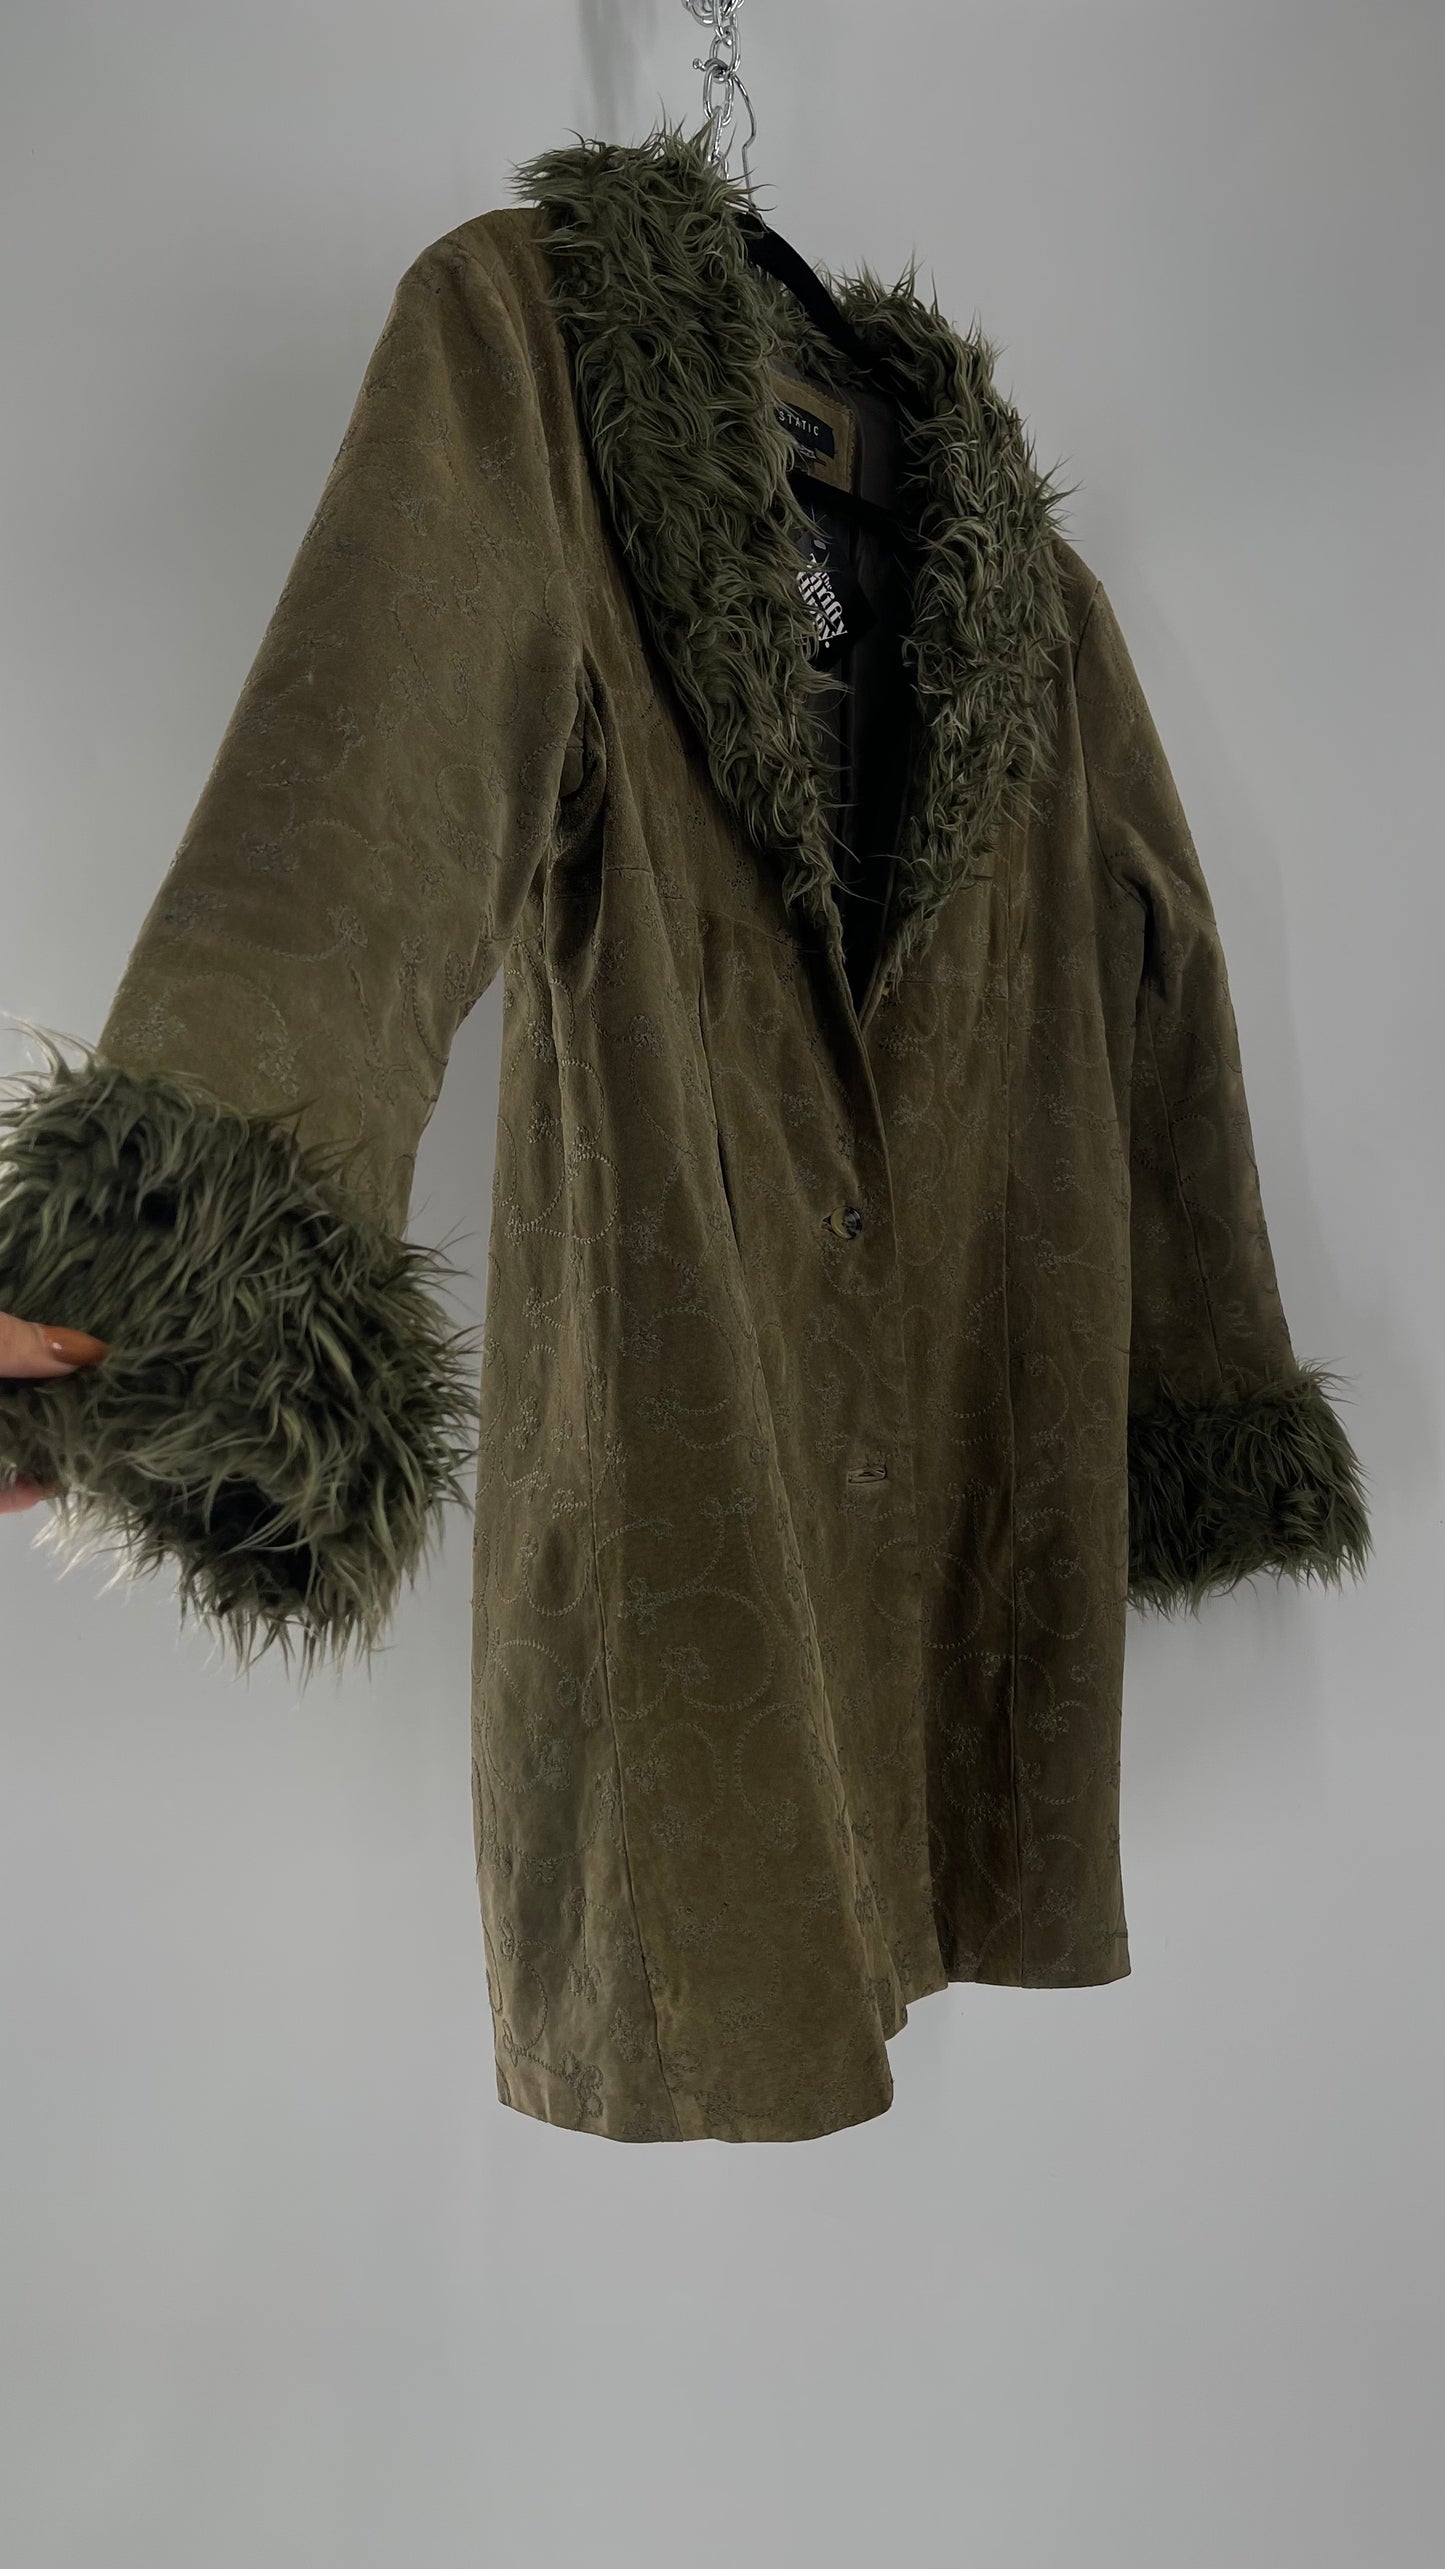 Vintage STATIC Embroidered Genuine Leather Coat with Fur Cuffs and Collar (C) (XL)